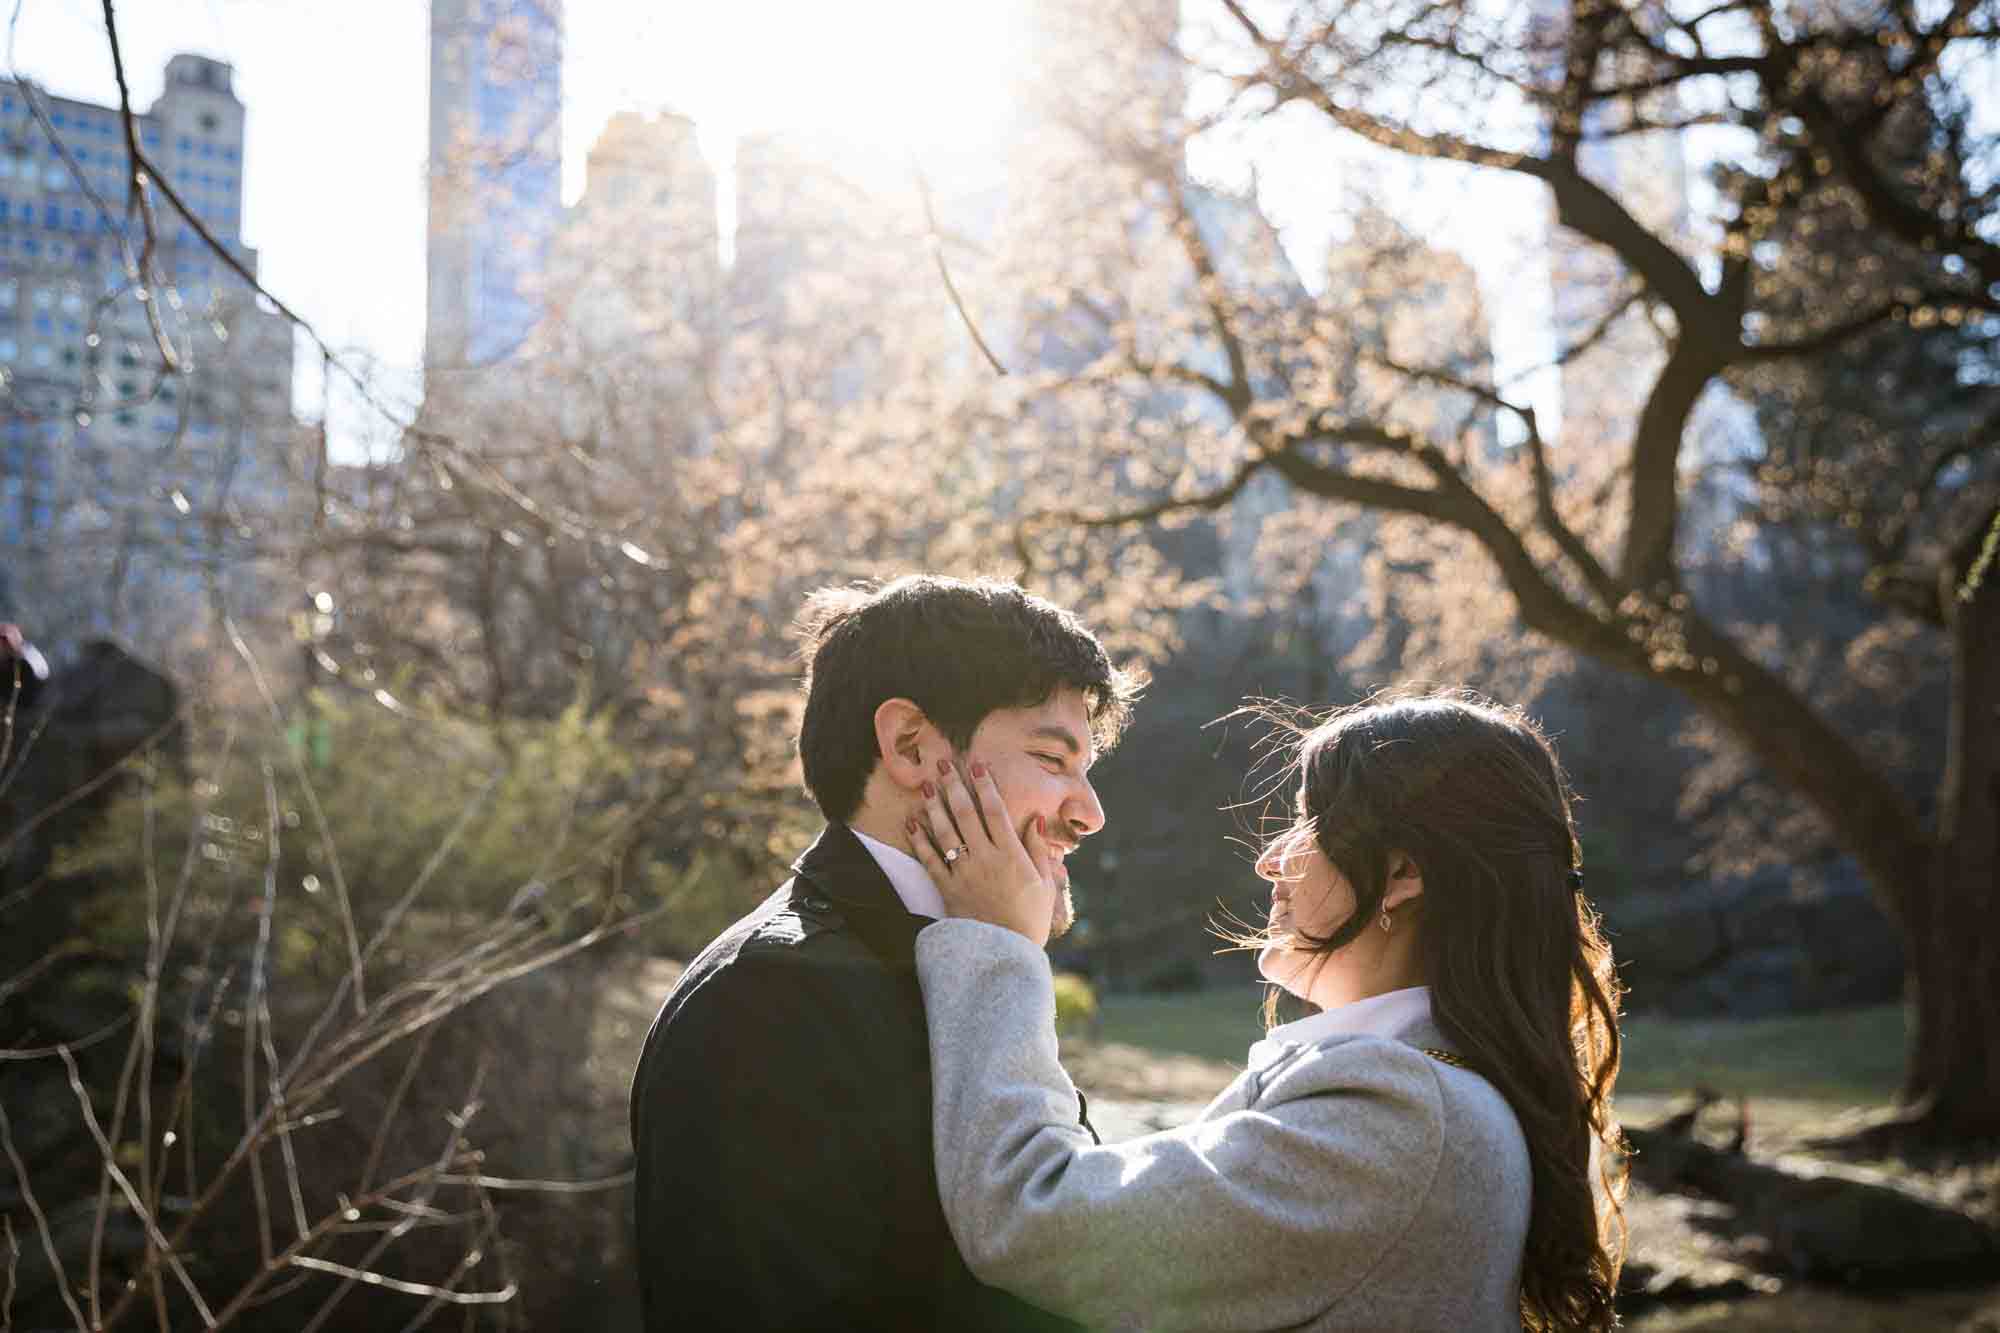 Woman holding man with hand on his cheek during a Gapstow Bridge surprise proposal in Central Park